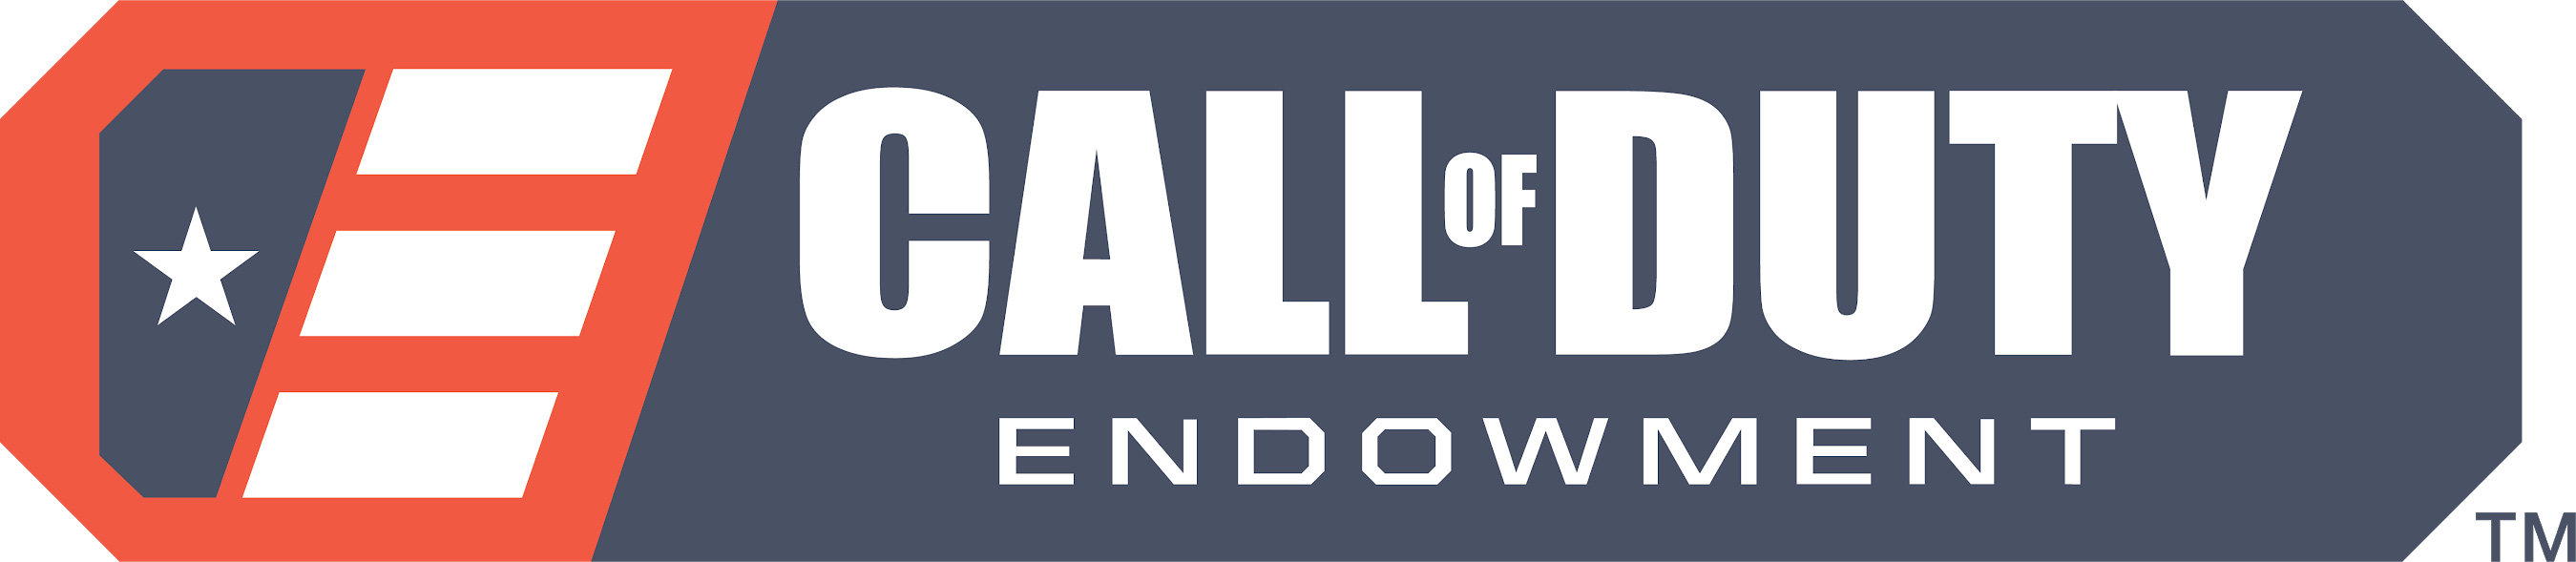 Call of Duty Endowment  - Let's Get Our Vets Back to Work